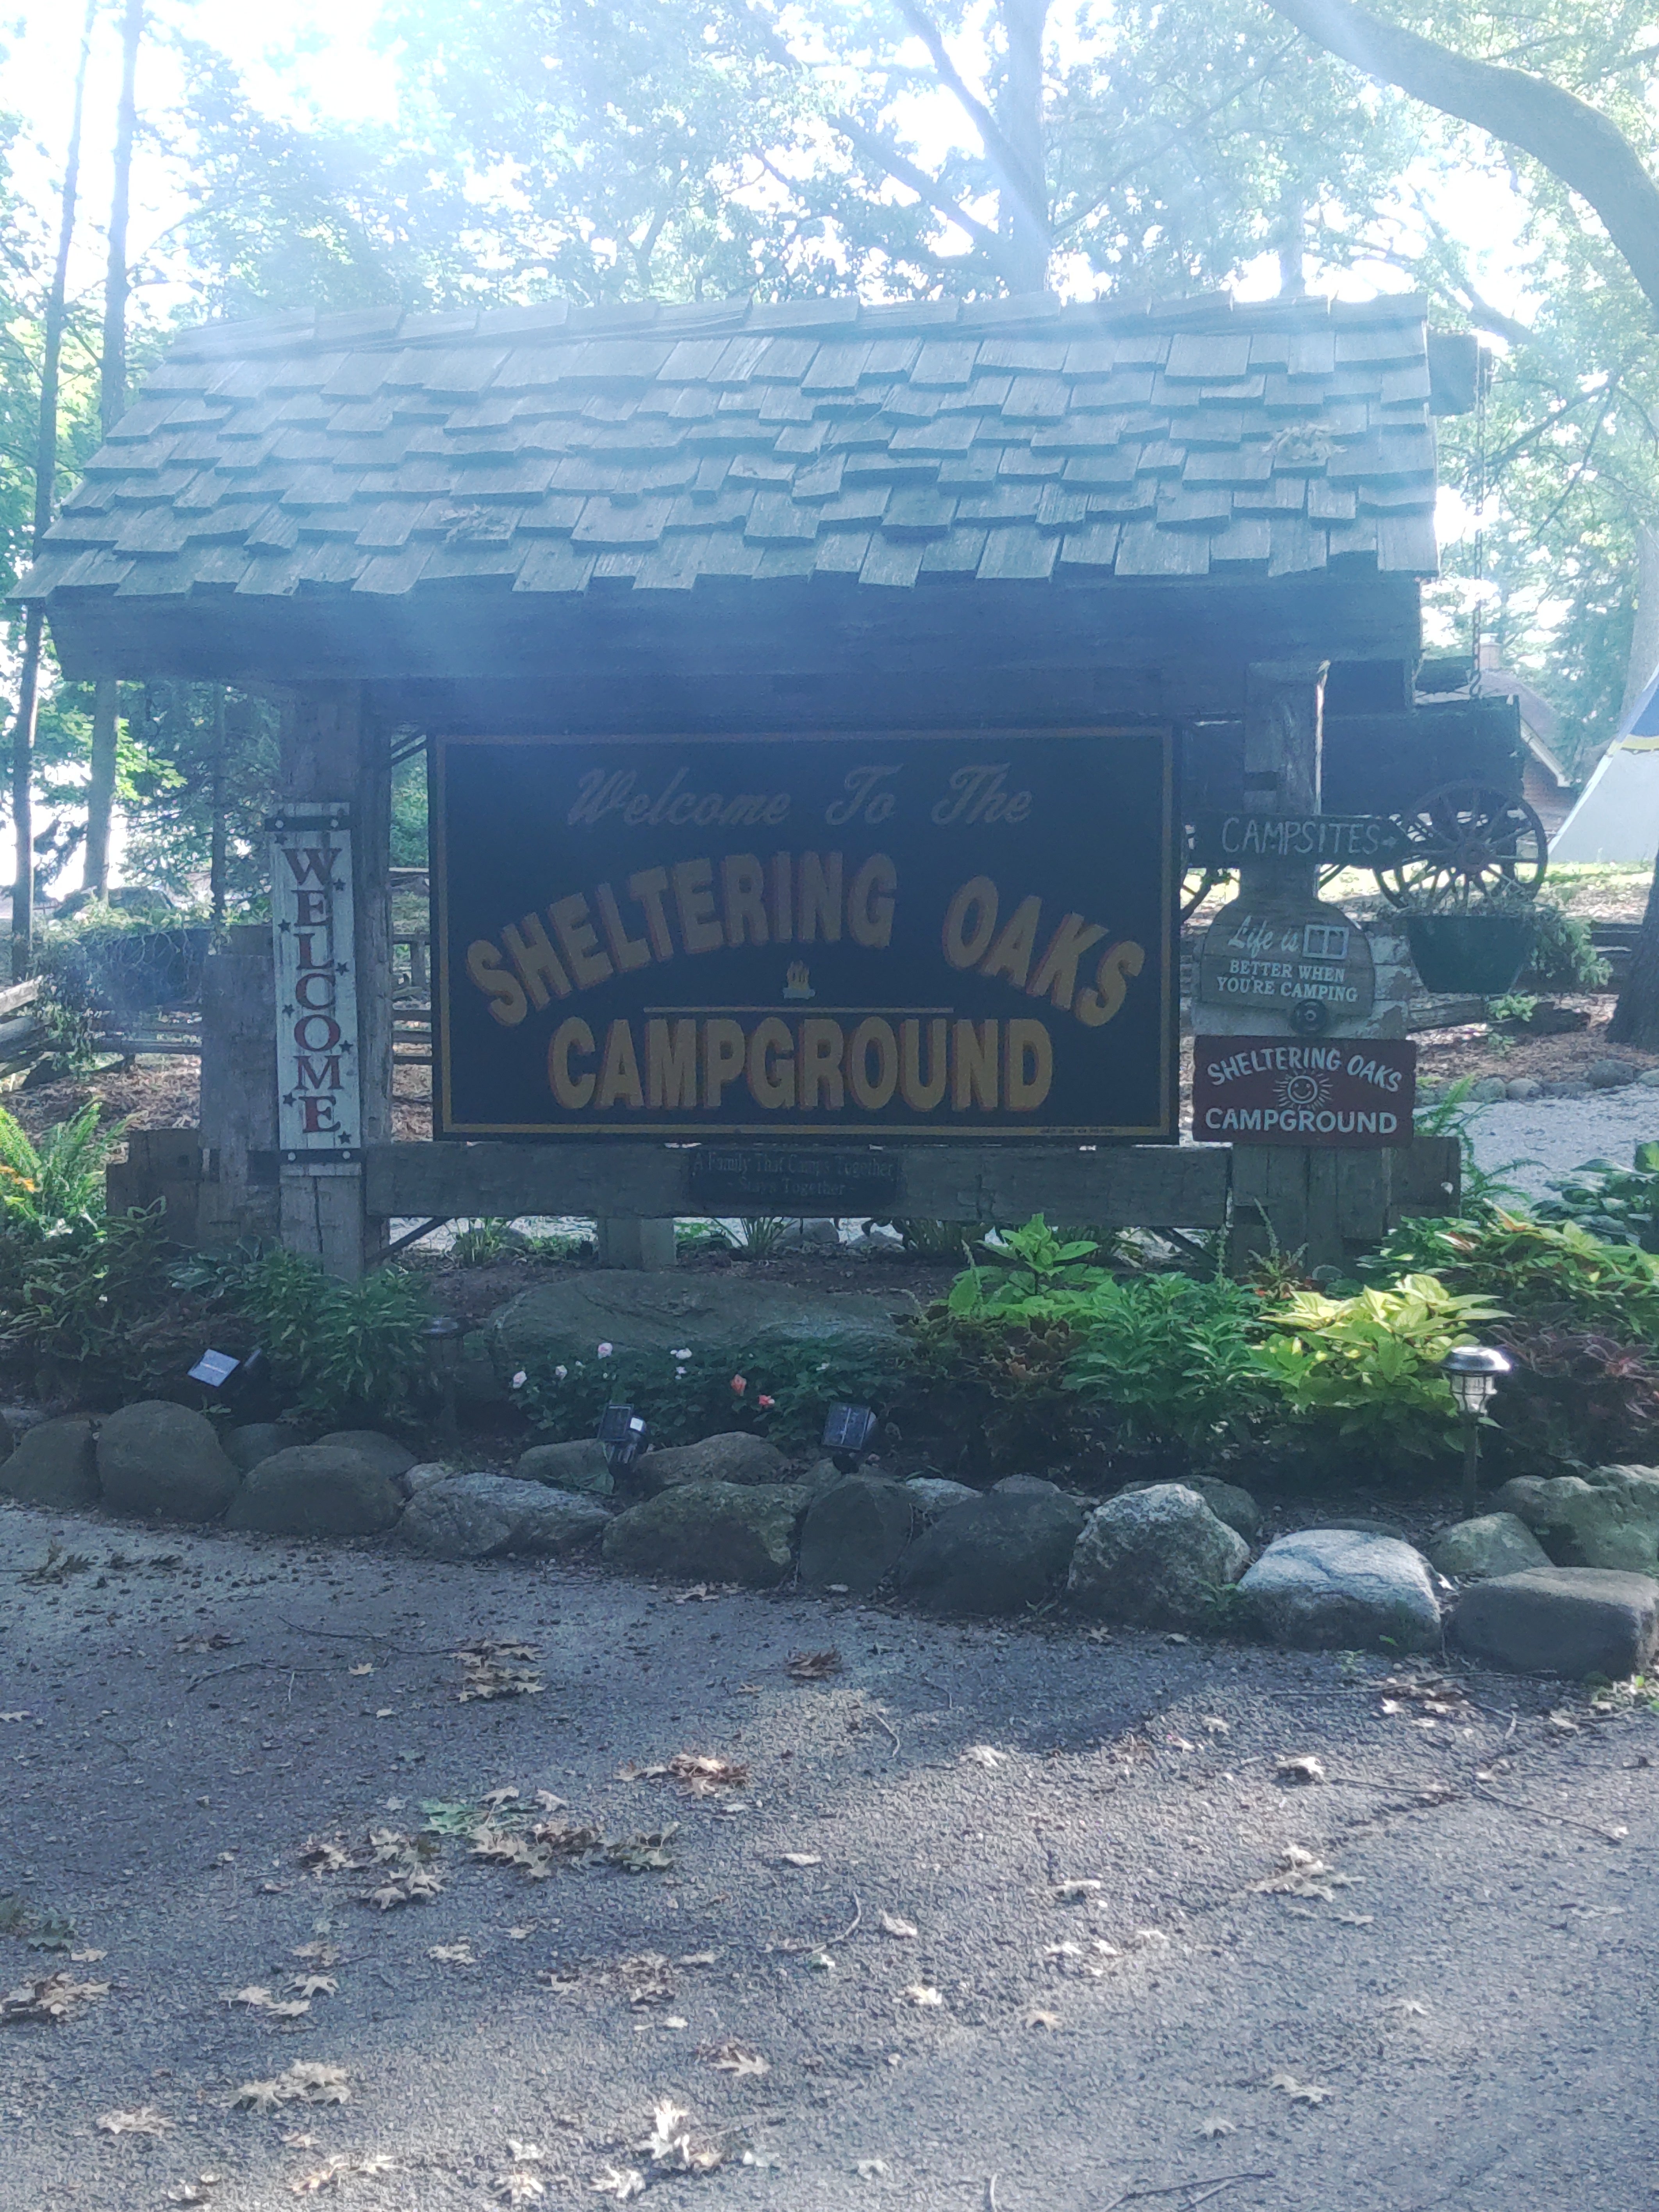 Camper submitted image from Sheltering Oaks Campground - 4